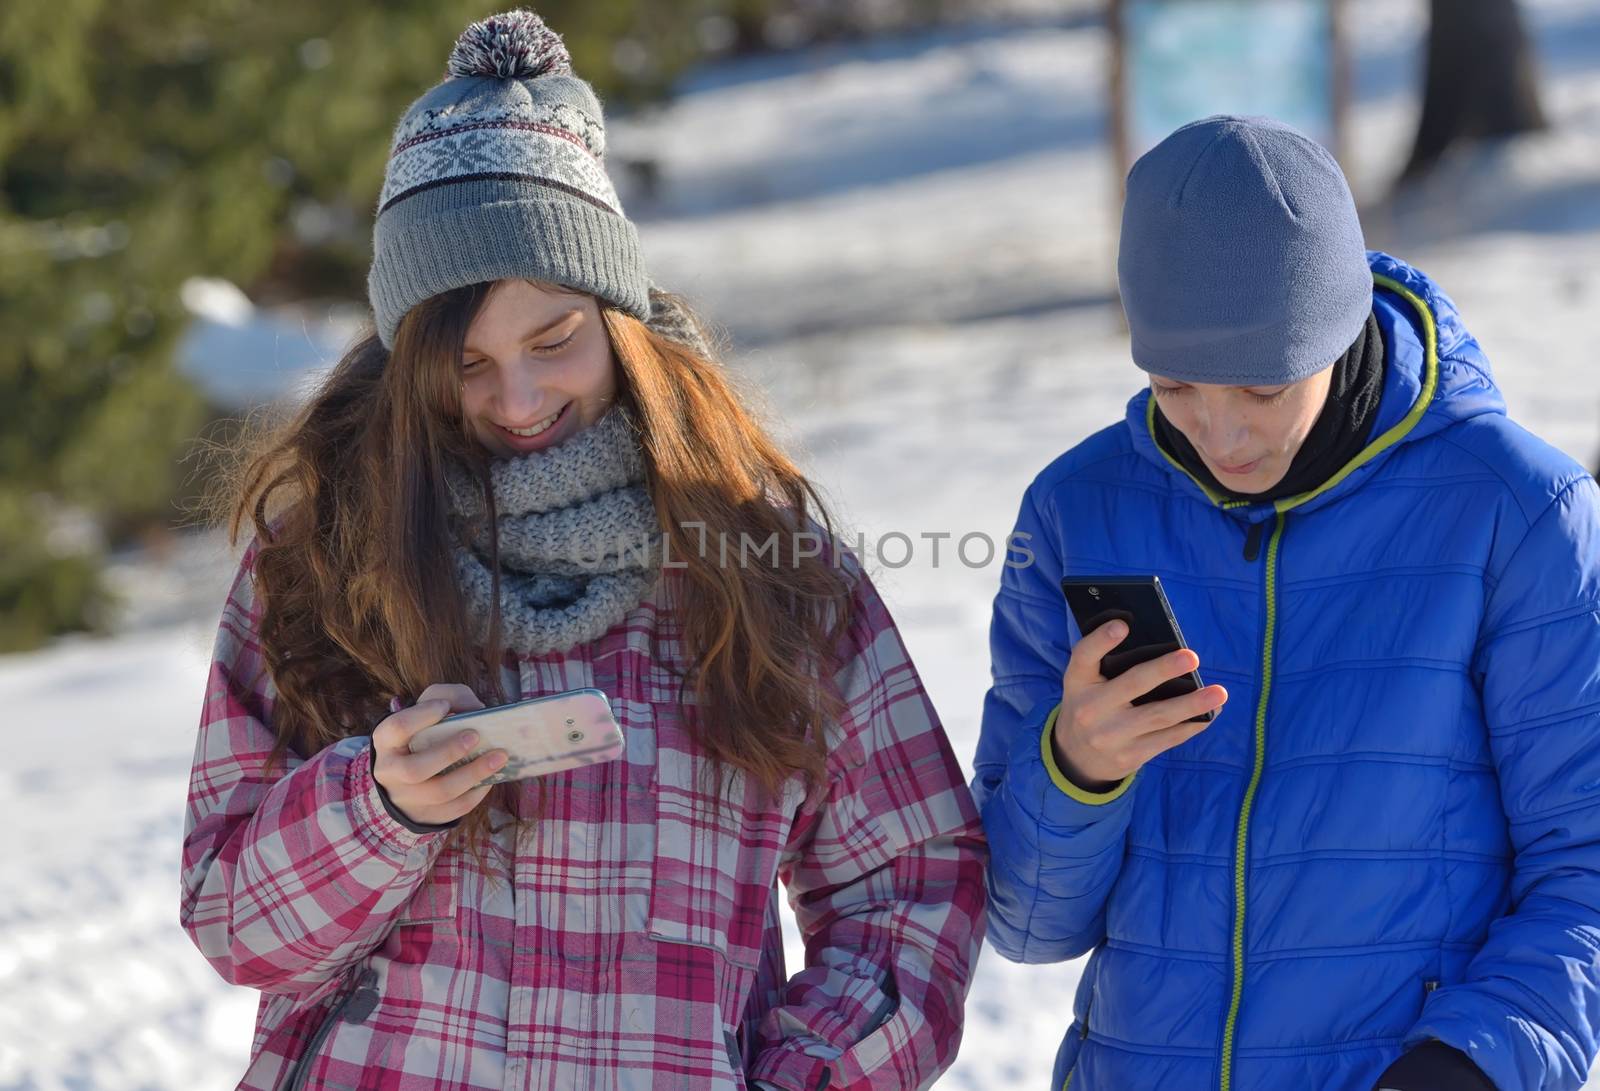 Kids have fun with Smartphone in winter forest